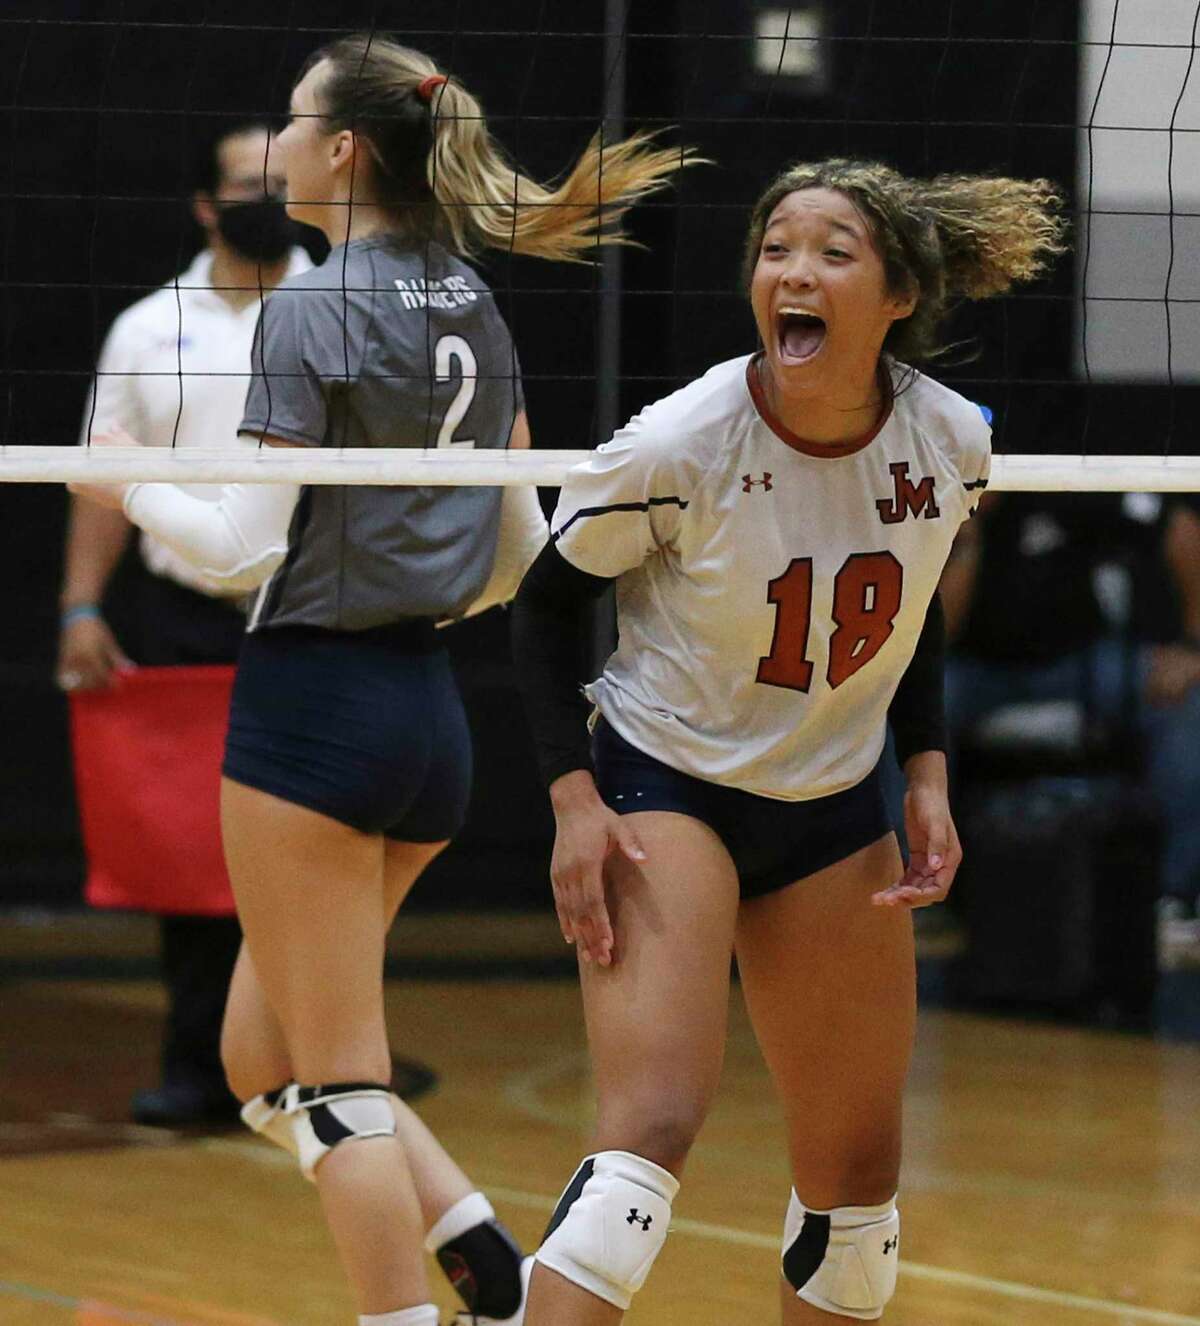 Madison's Dallasstar Johnson (18) reacts after a winning point against Smithson Valley during the first round of Class 6A volleyball playoffs on Tuesday, Nov. 2, 2021.